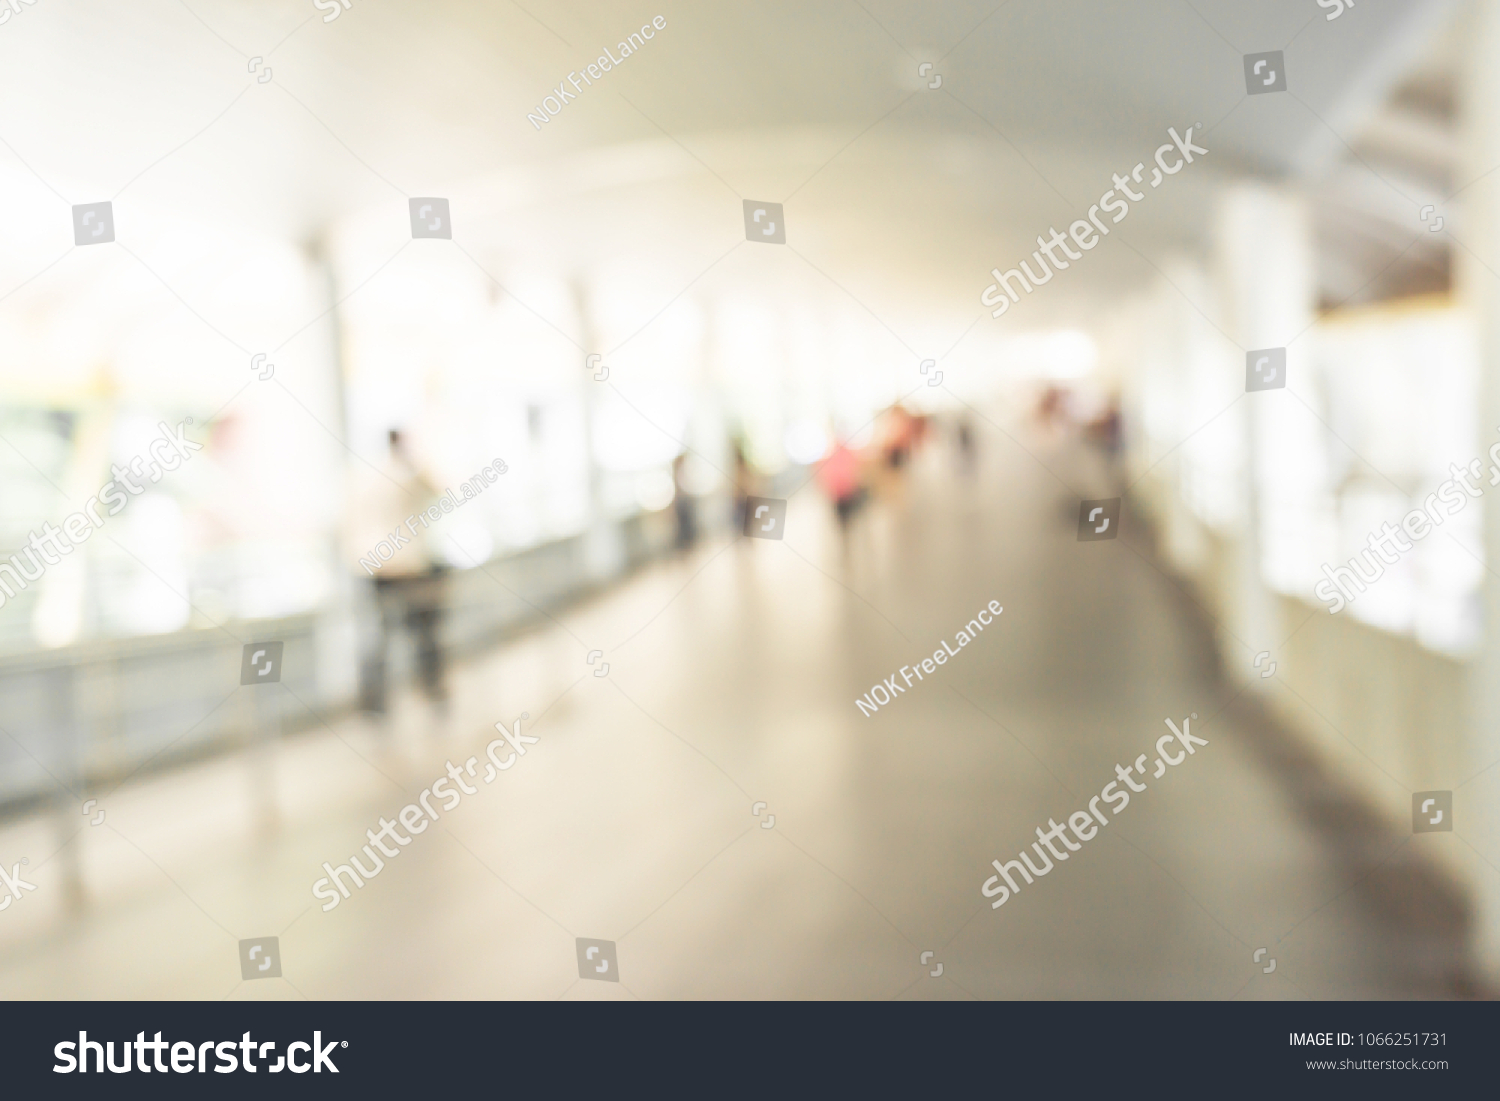 Background image blurred inside the mall for the background. #1066251731